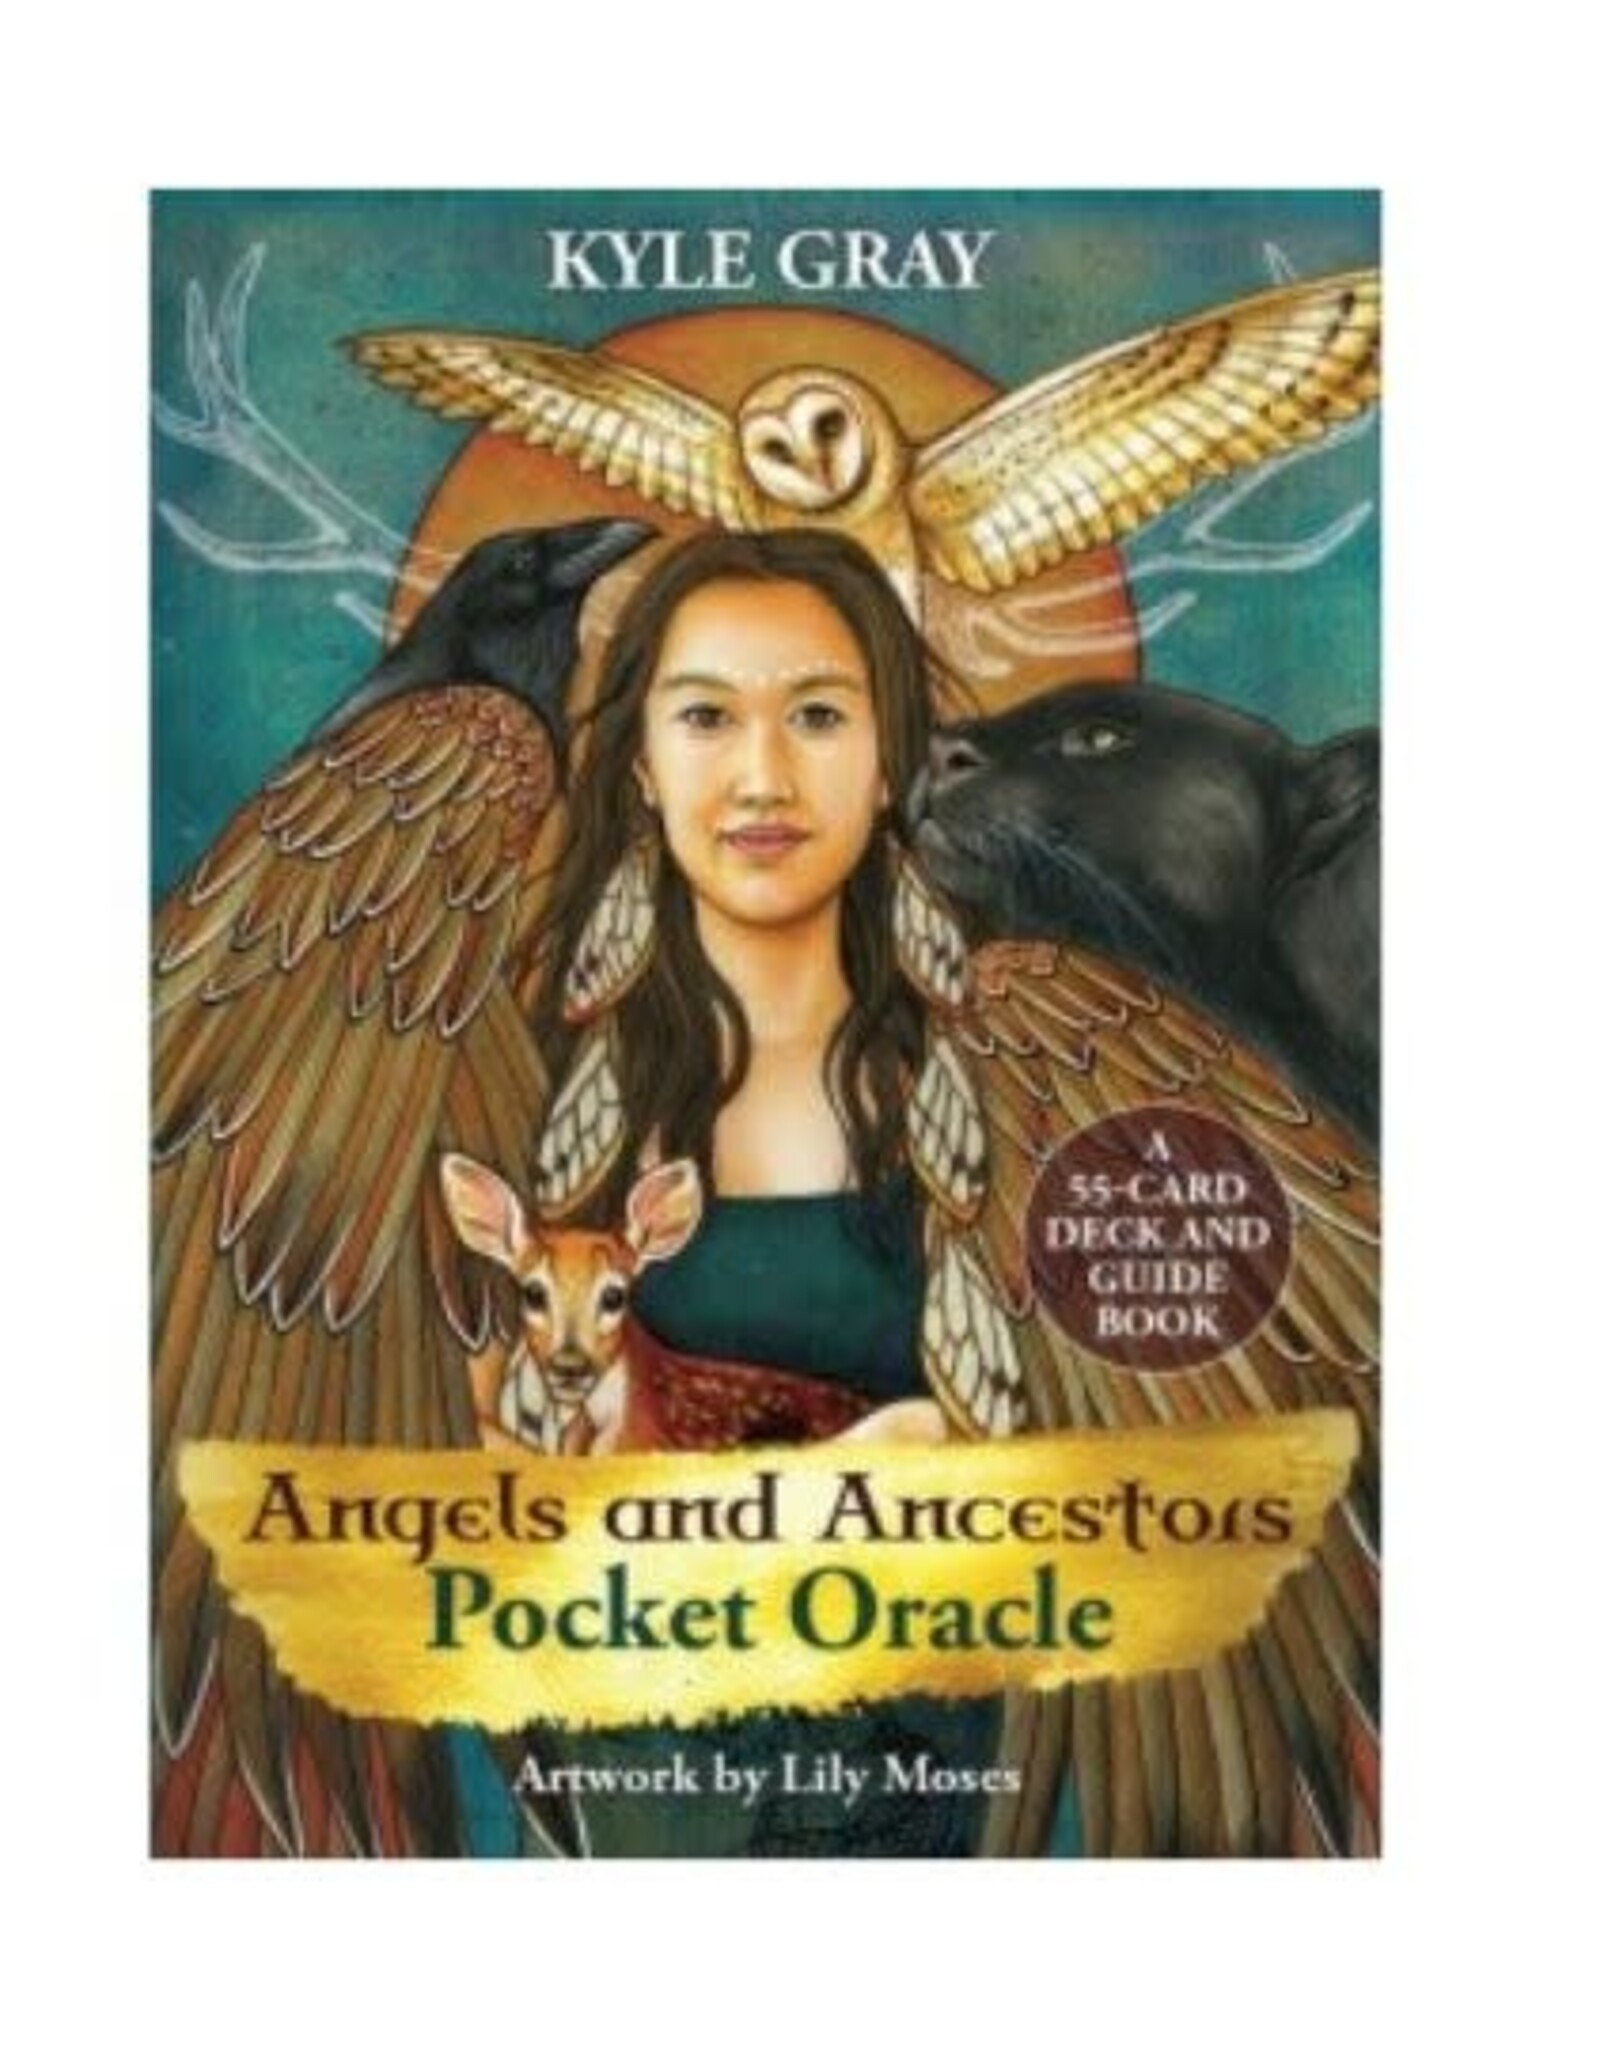 Angels and Ancestors Pocket Oracle by Kyle Gray